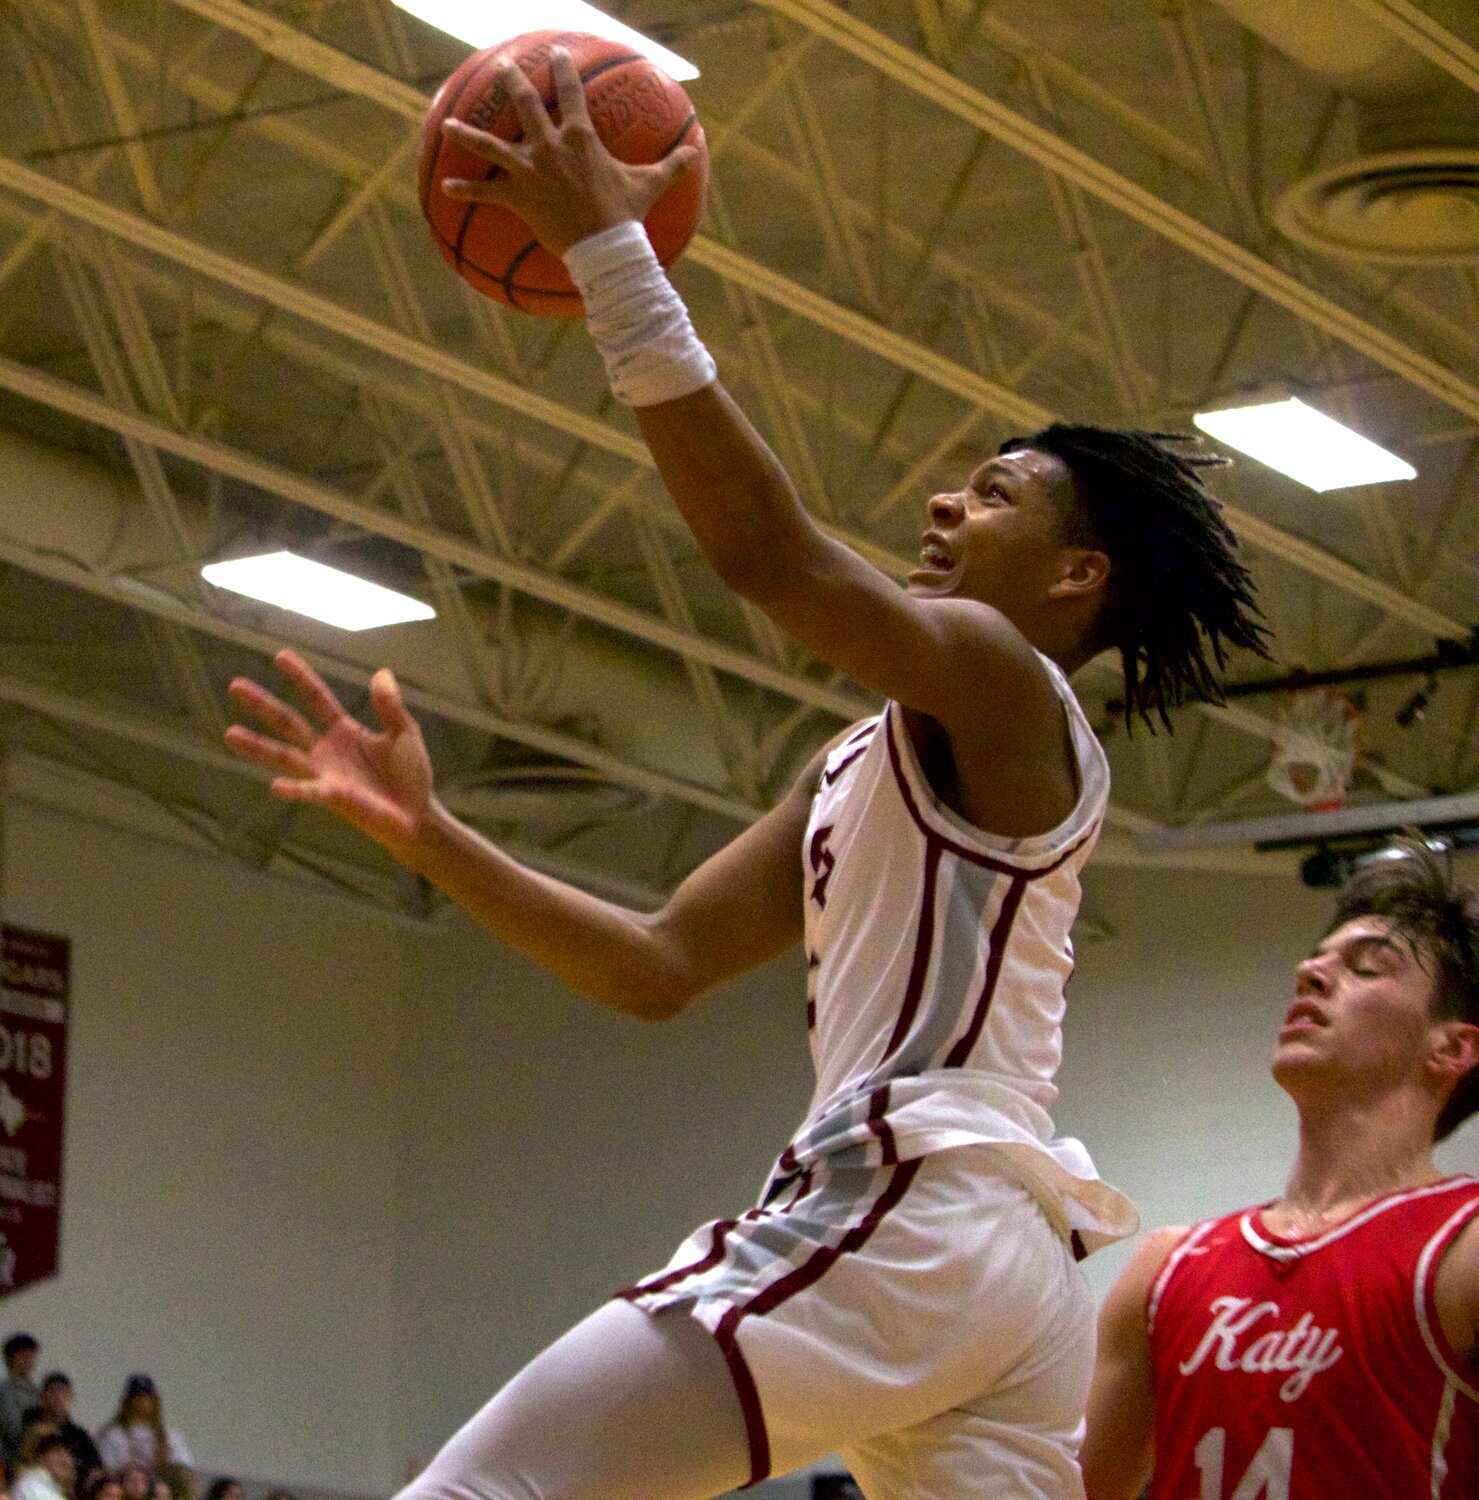 Dylan Jones-Bynum shoots a layup during Wednesday’s game between Katy and Cinco Ranch at the Cinco Ranch gym.